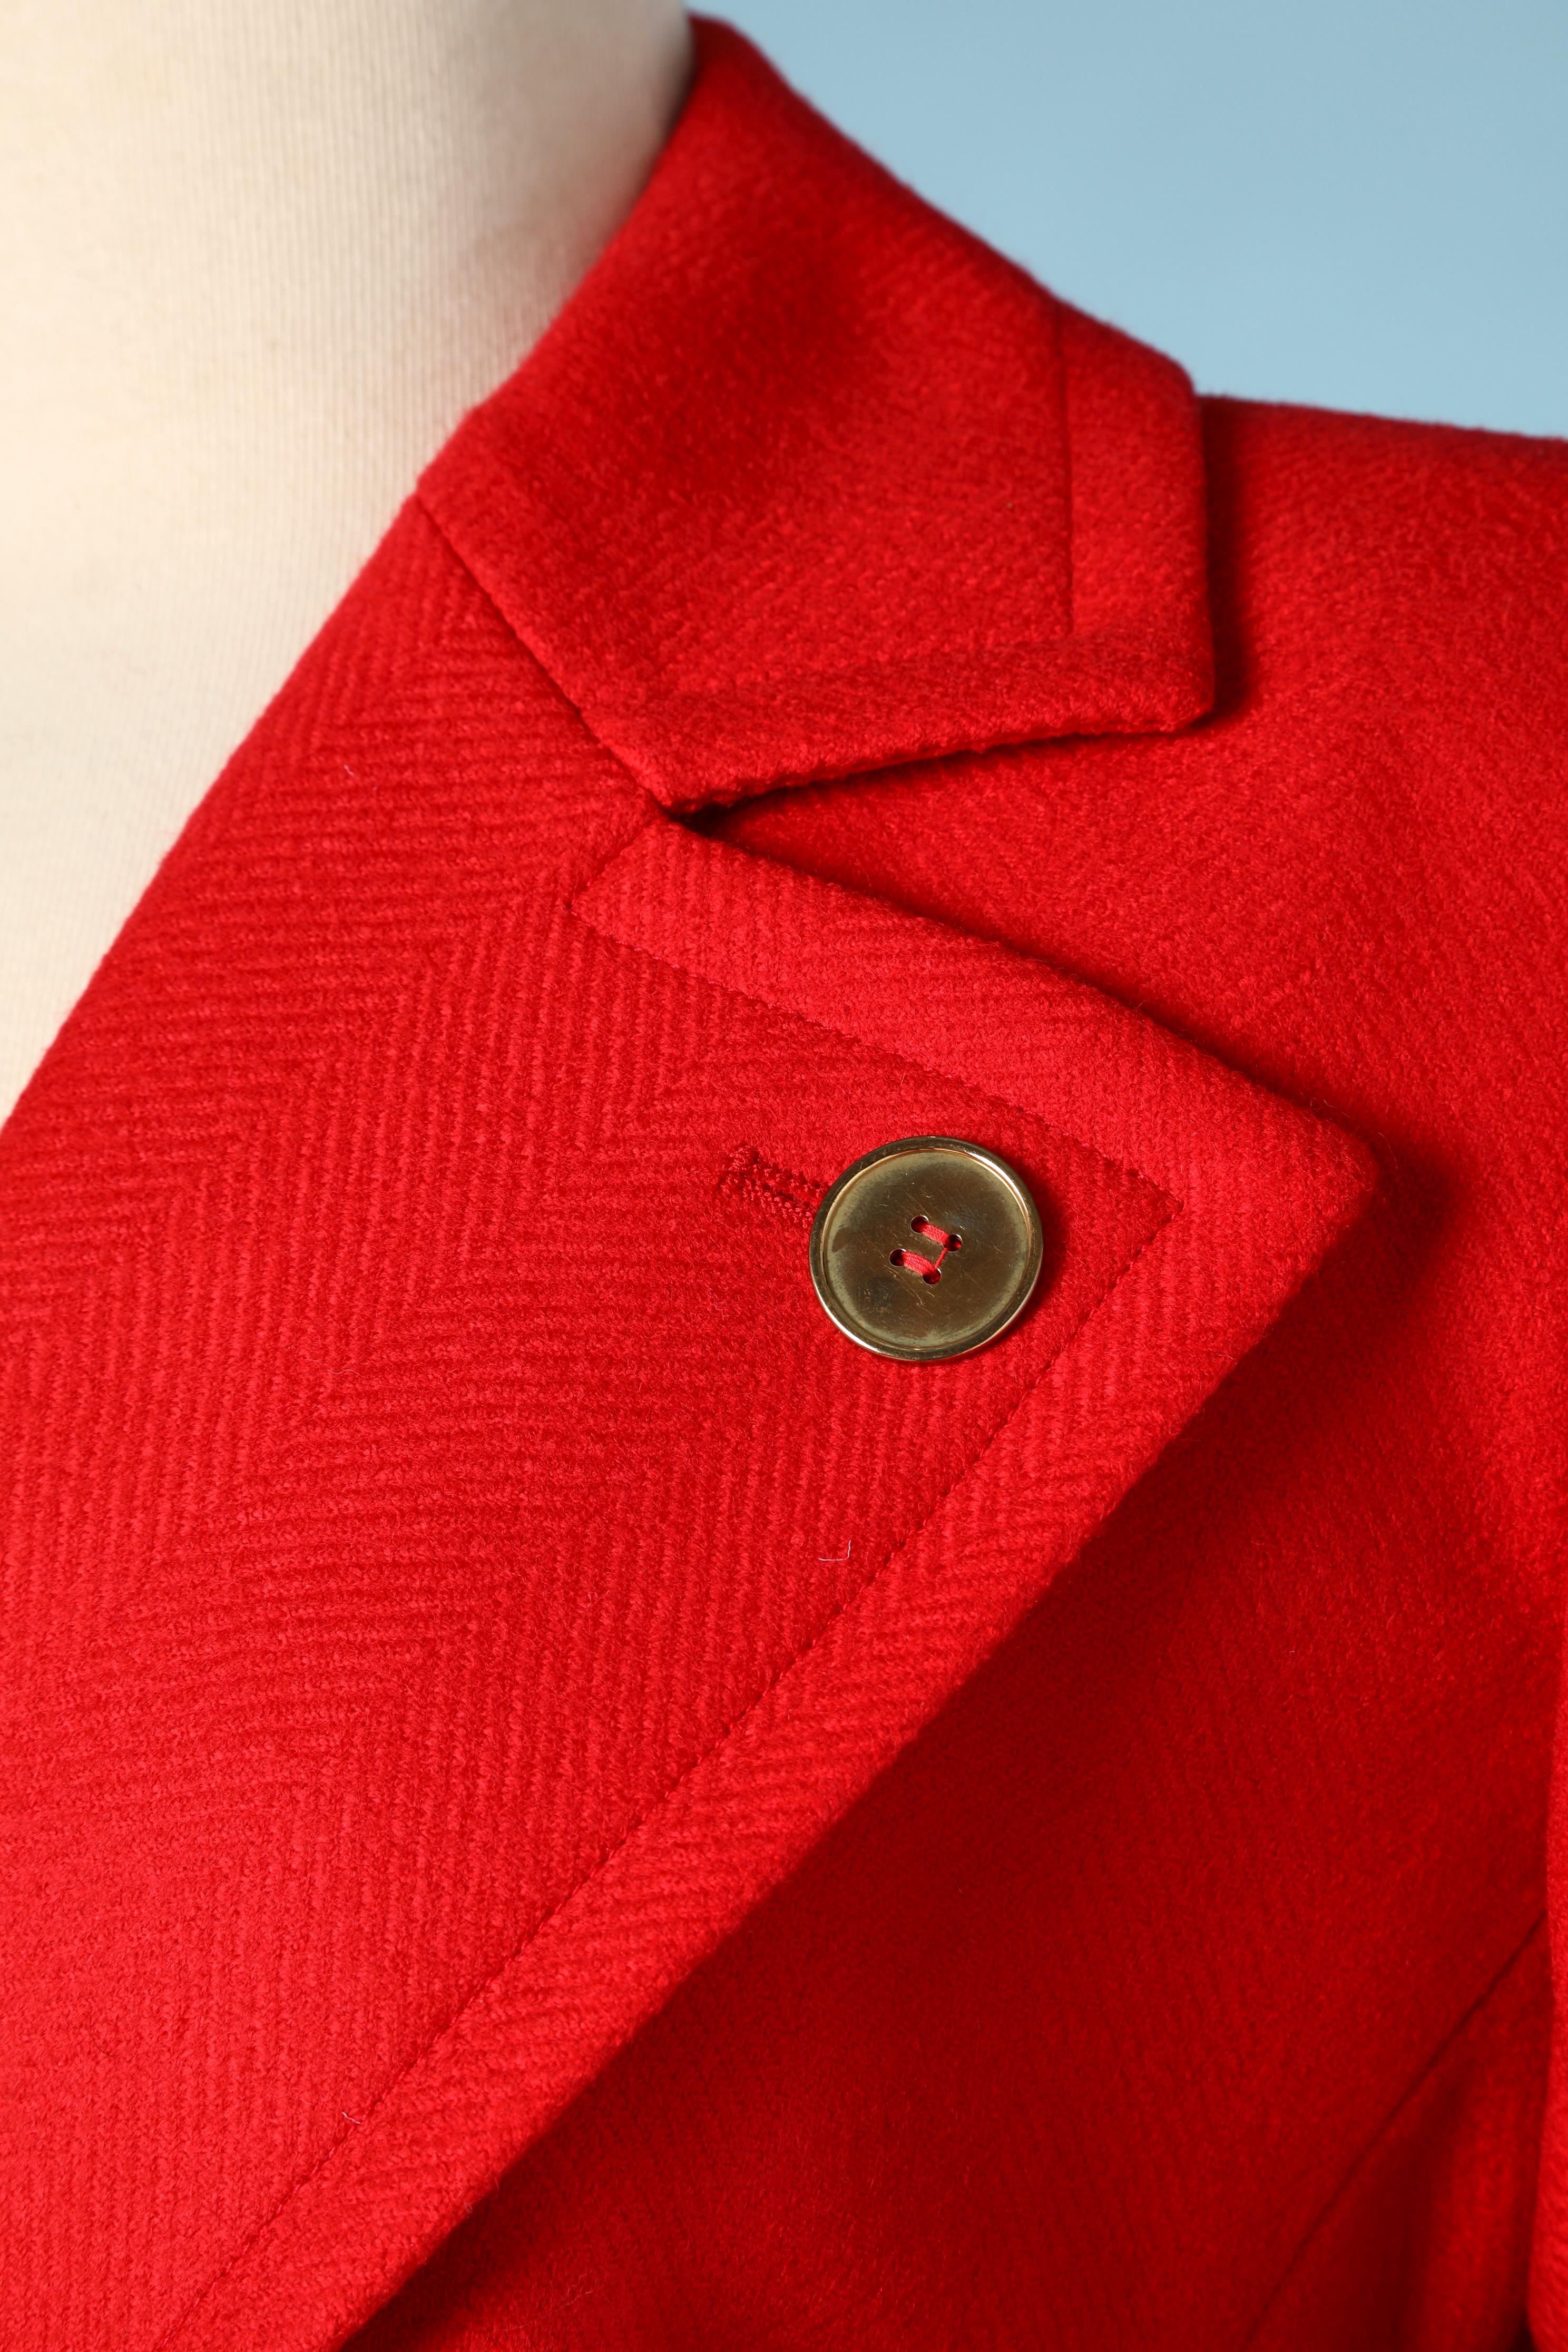 Red wool double-breasted jacket with gold metallic buttons